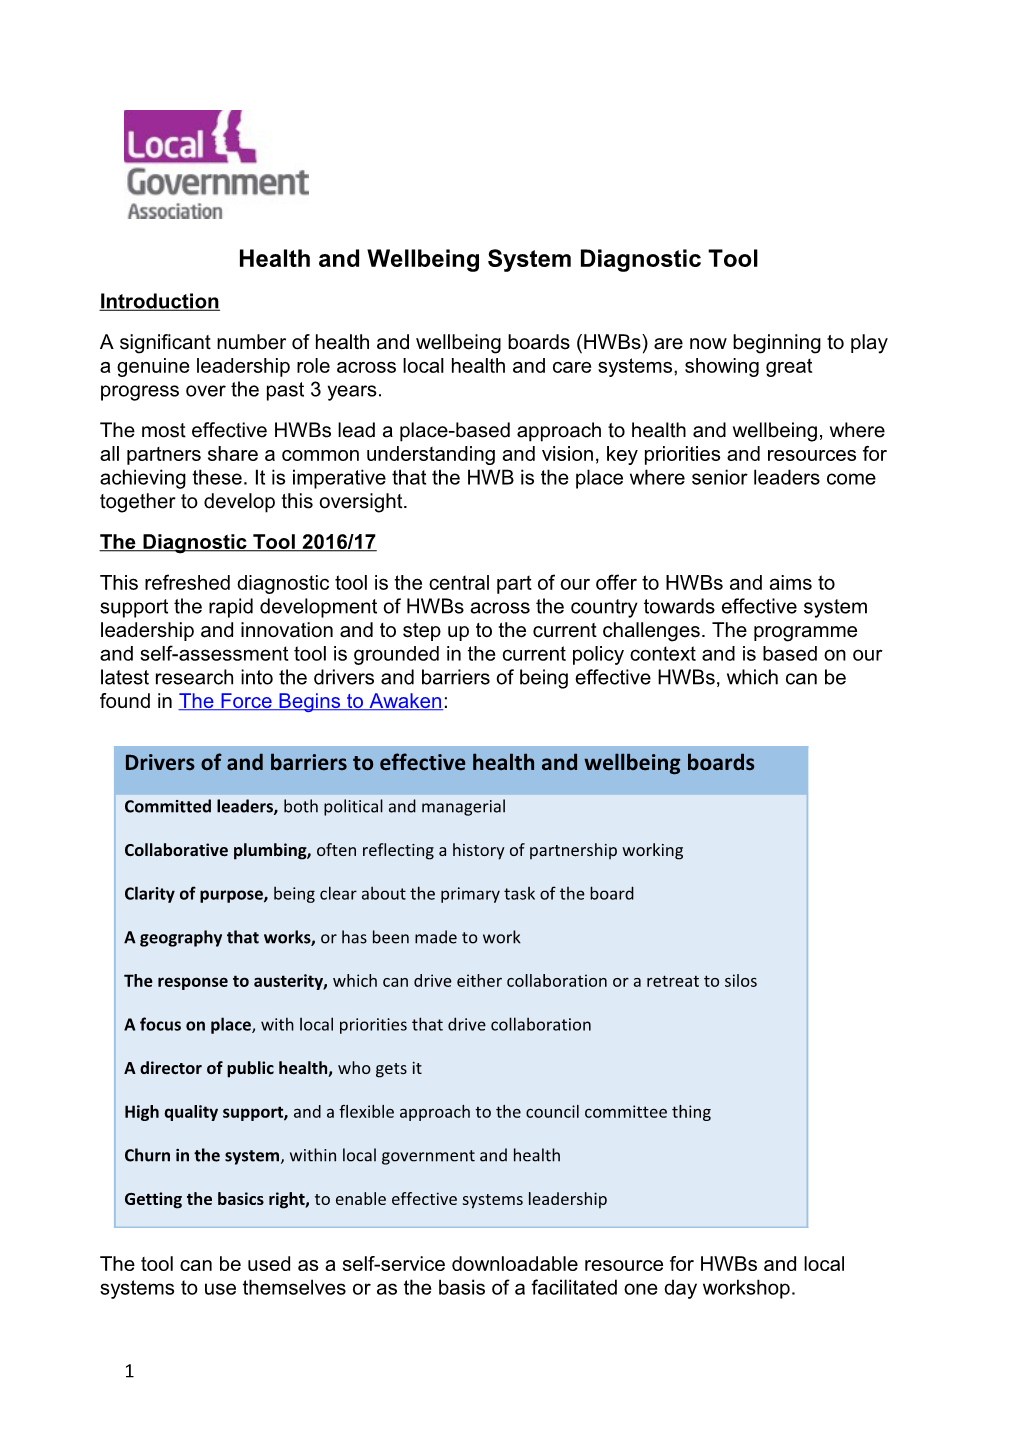 Health and Wellbeing System Diagnostic Tool